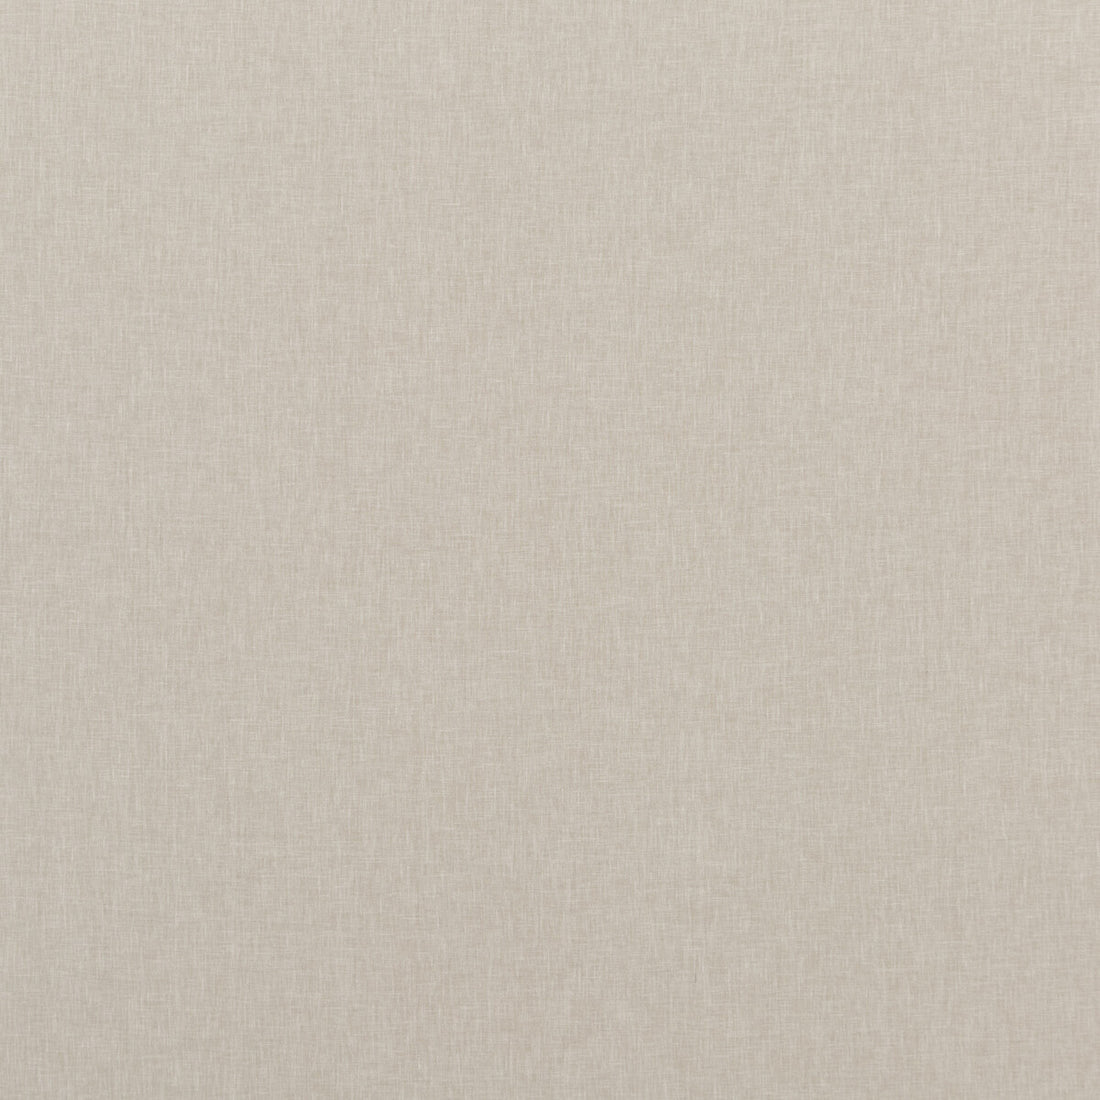 Carnival Plain fabric in pumice color - pattern PF50420.148.0 - by Baker Lifestyle in the Carnival collection